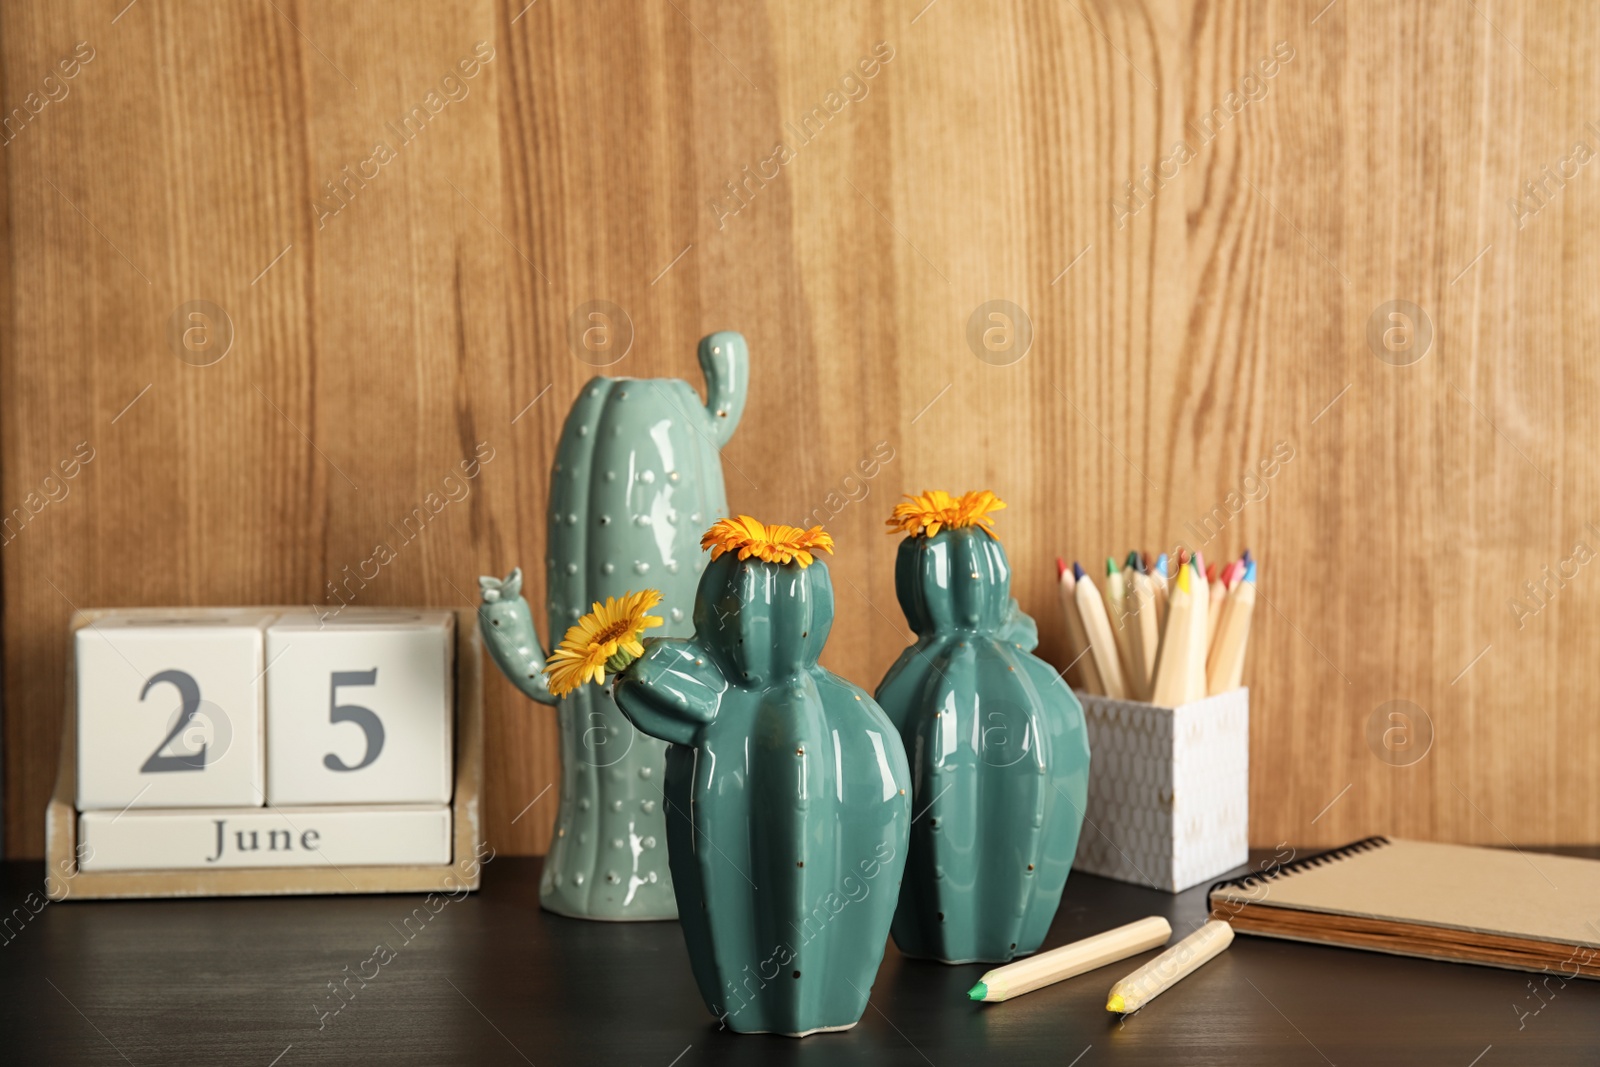 Photo of Trendy cactus shaped vases and stationery on table against wooden background. Creative decor